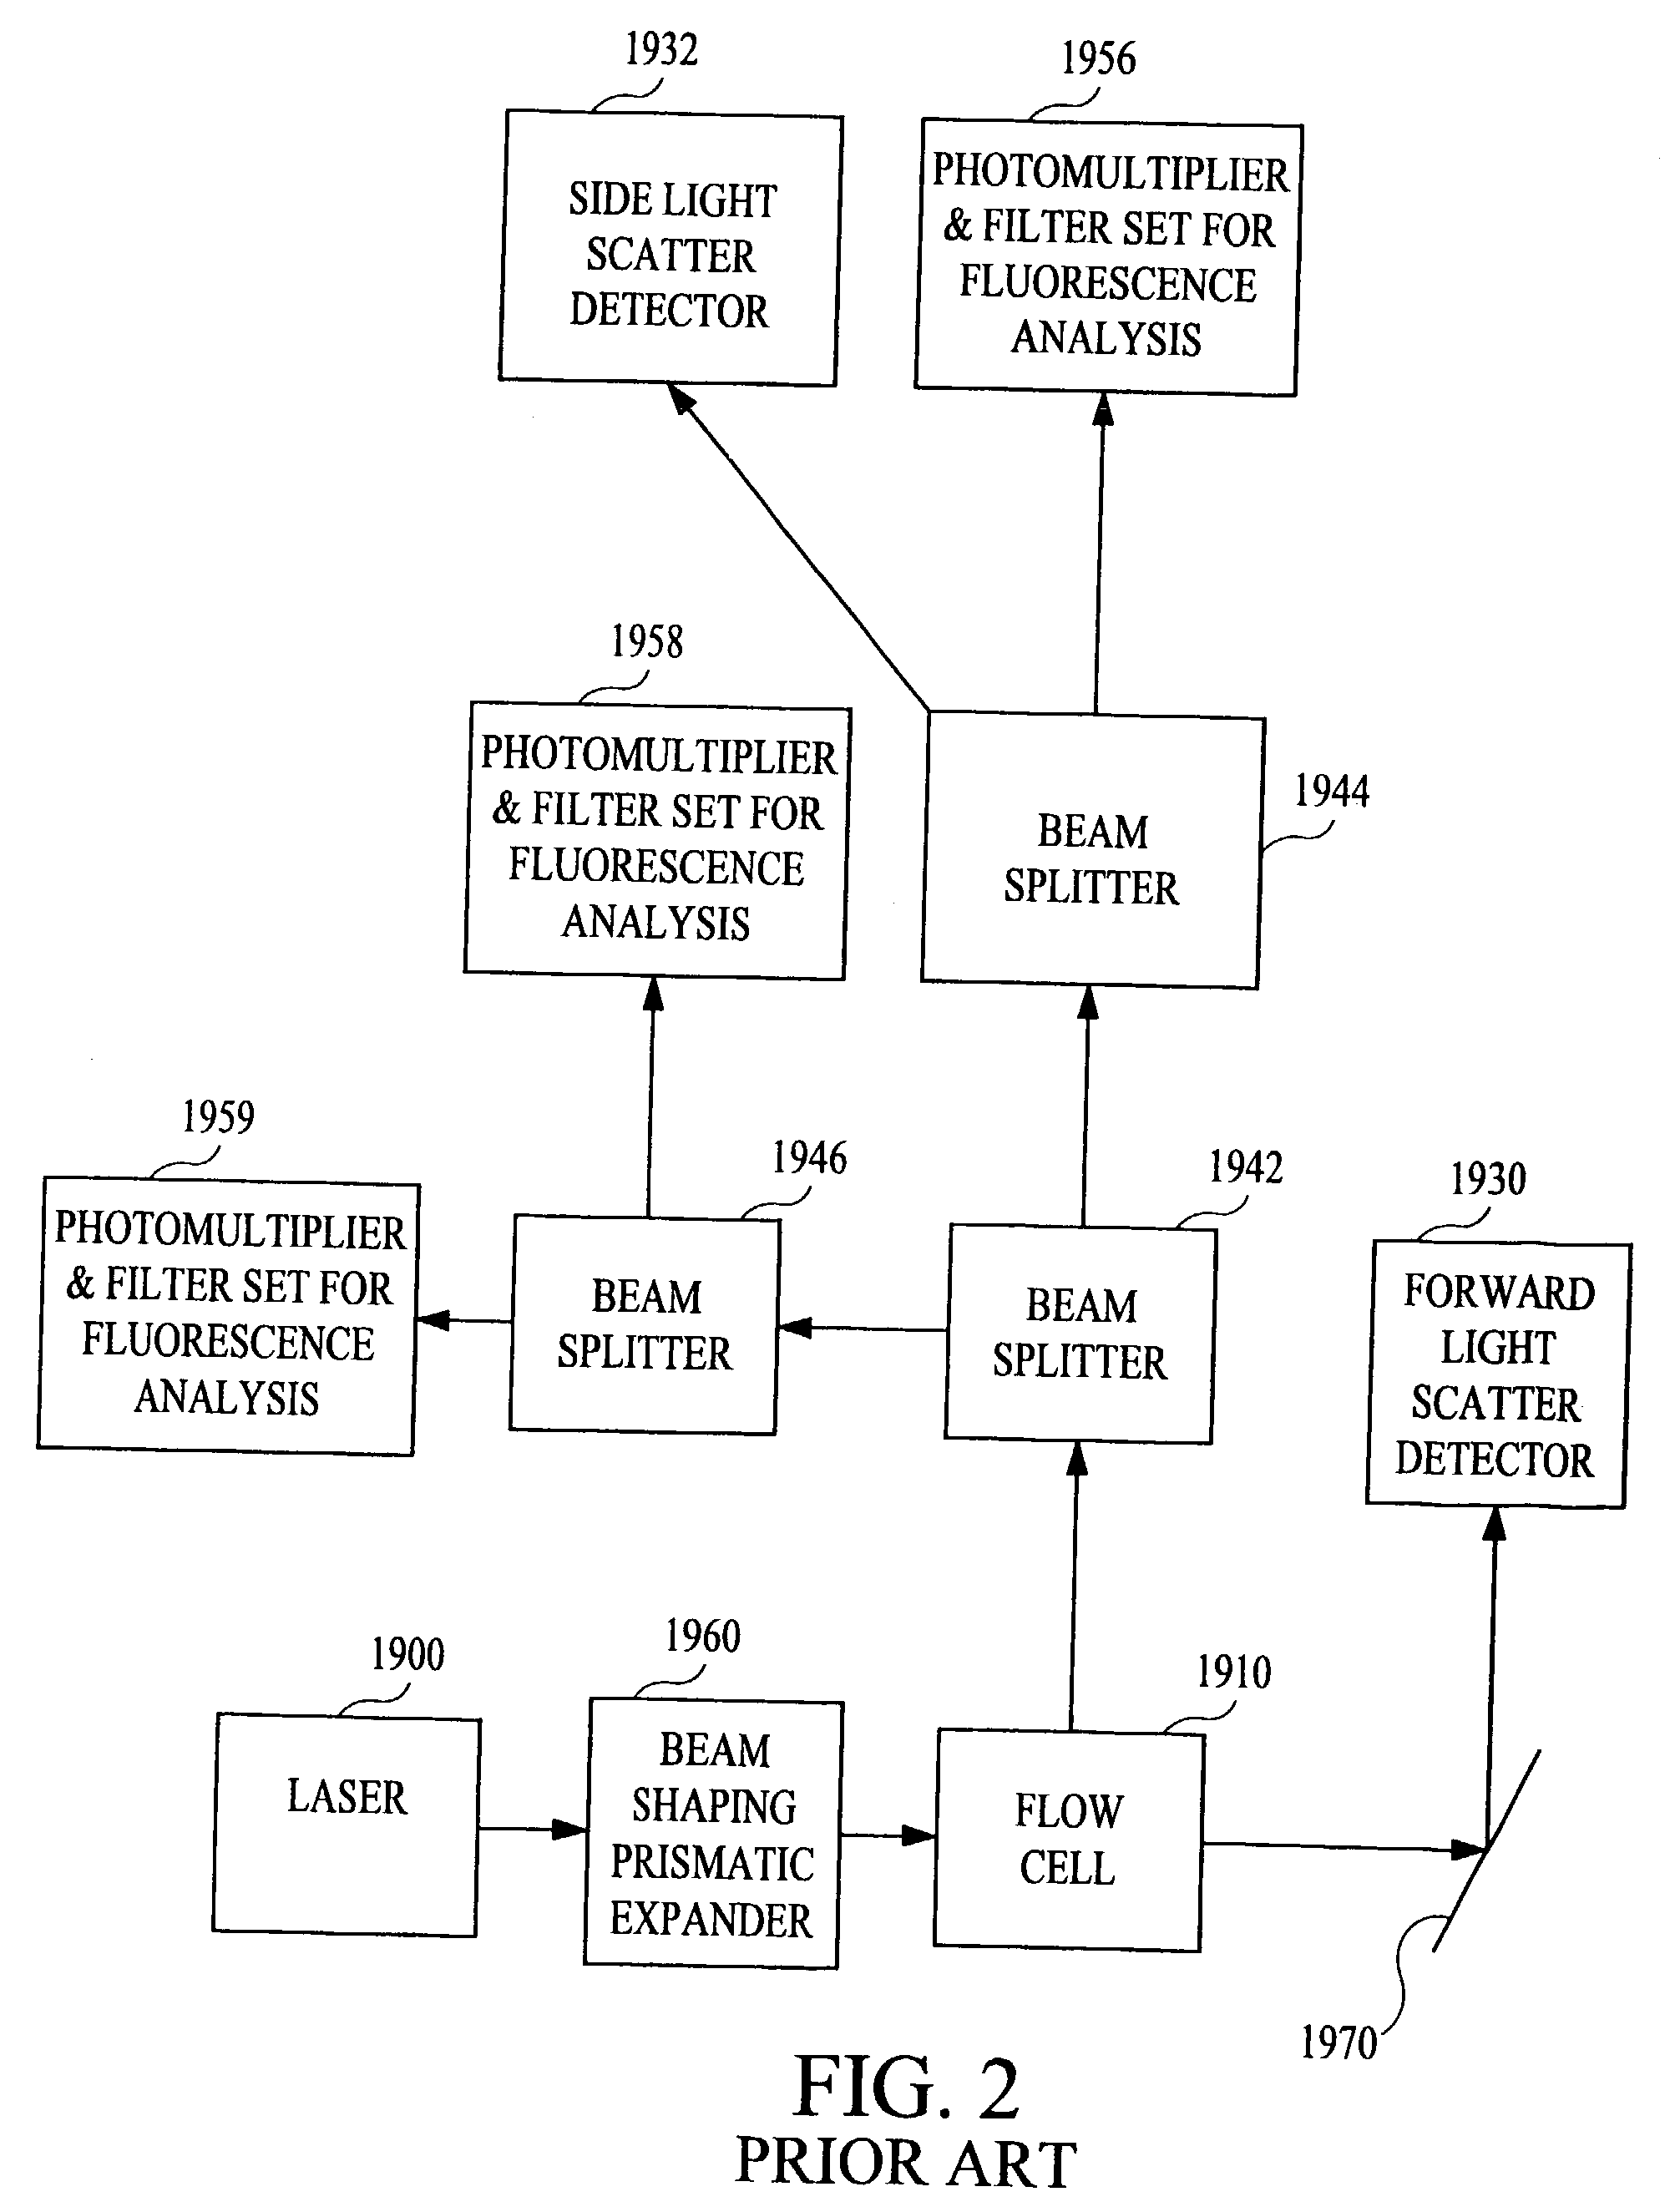 Multi-analyte diagnostic system and computer implemented process for same